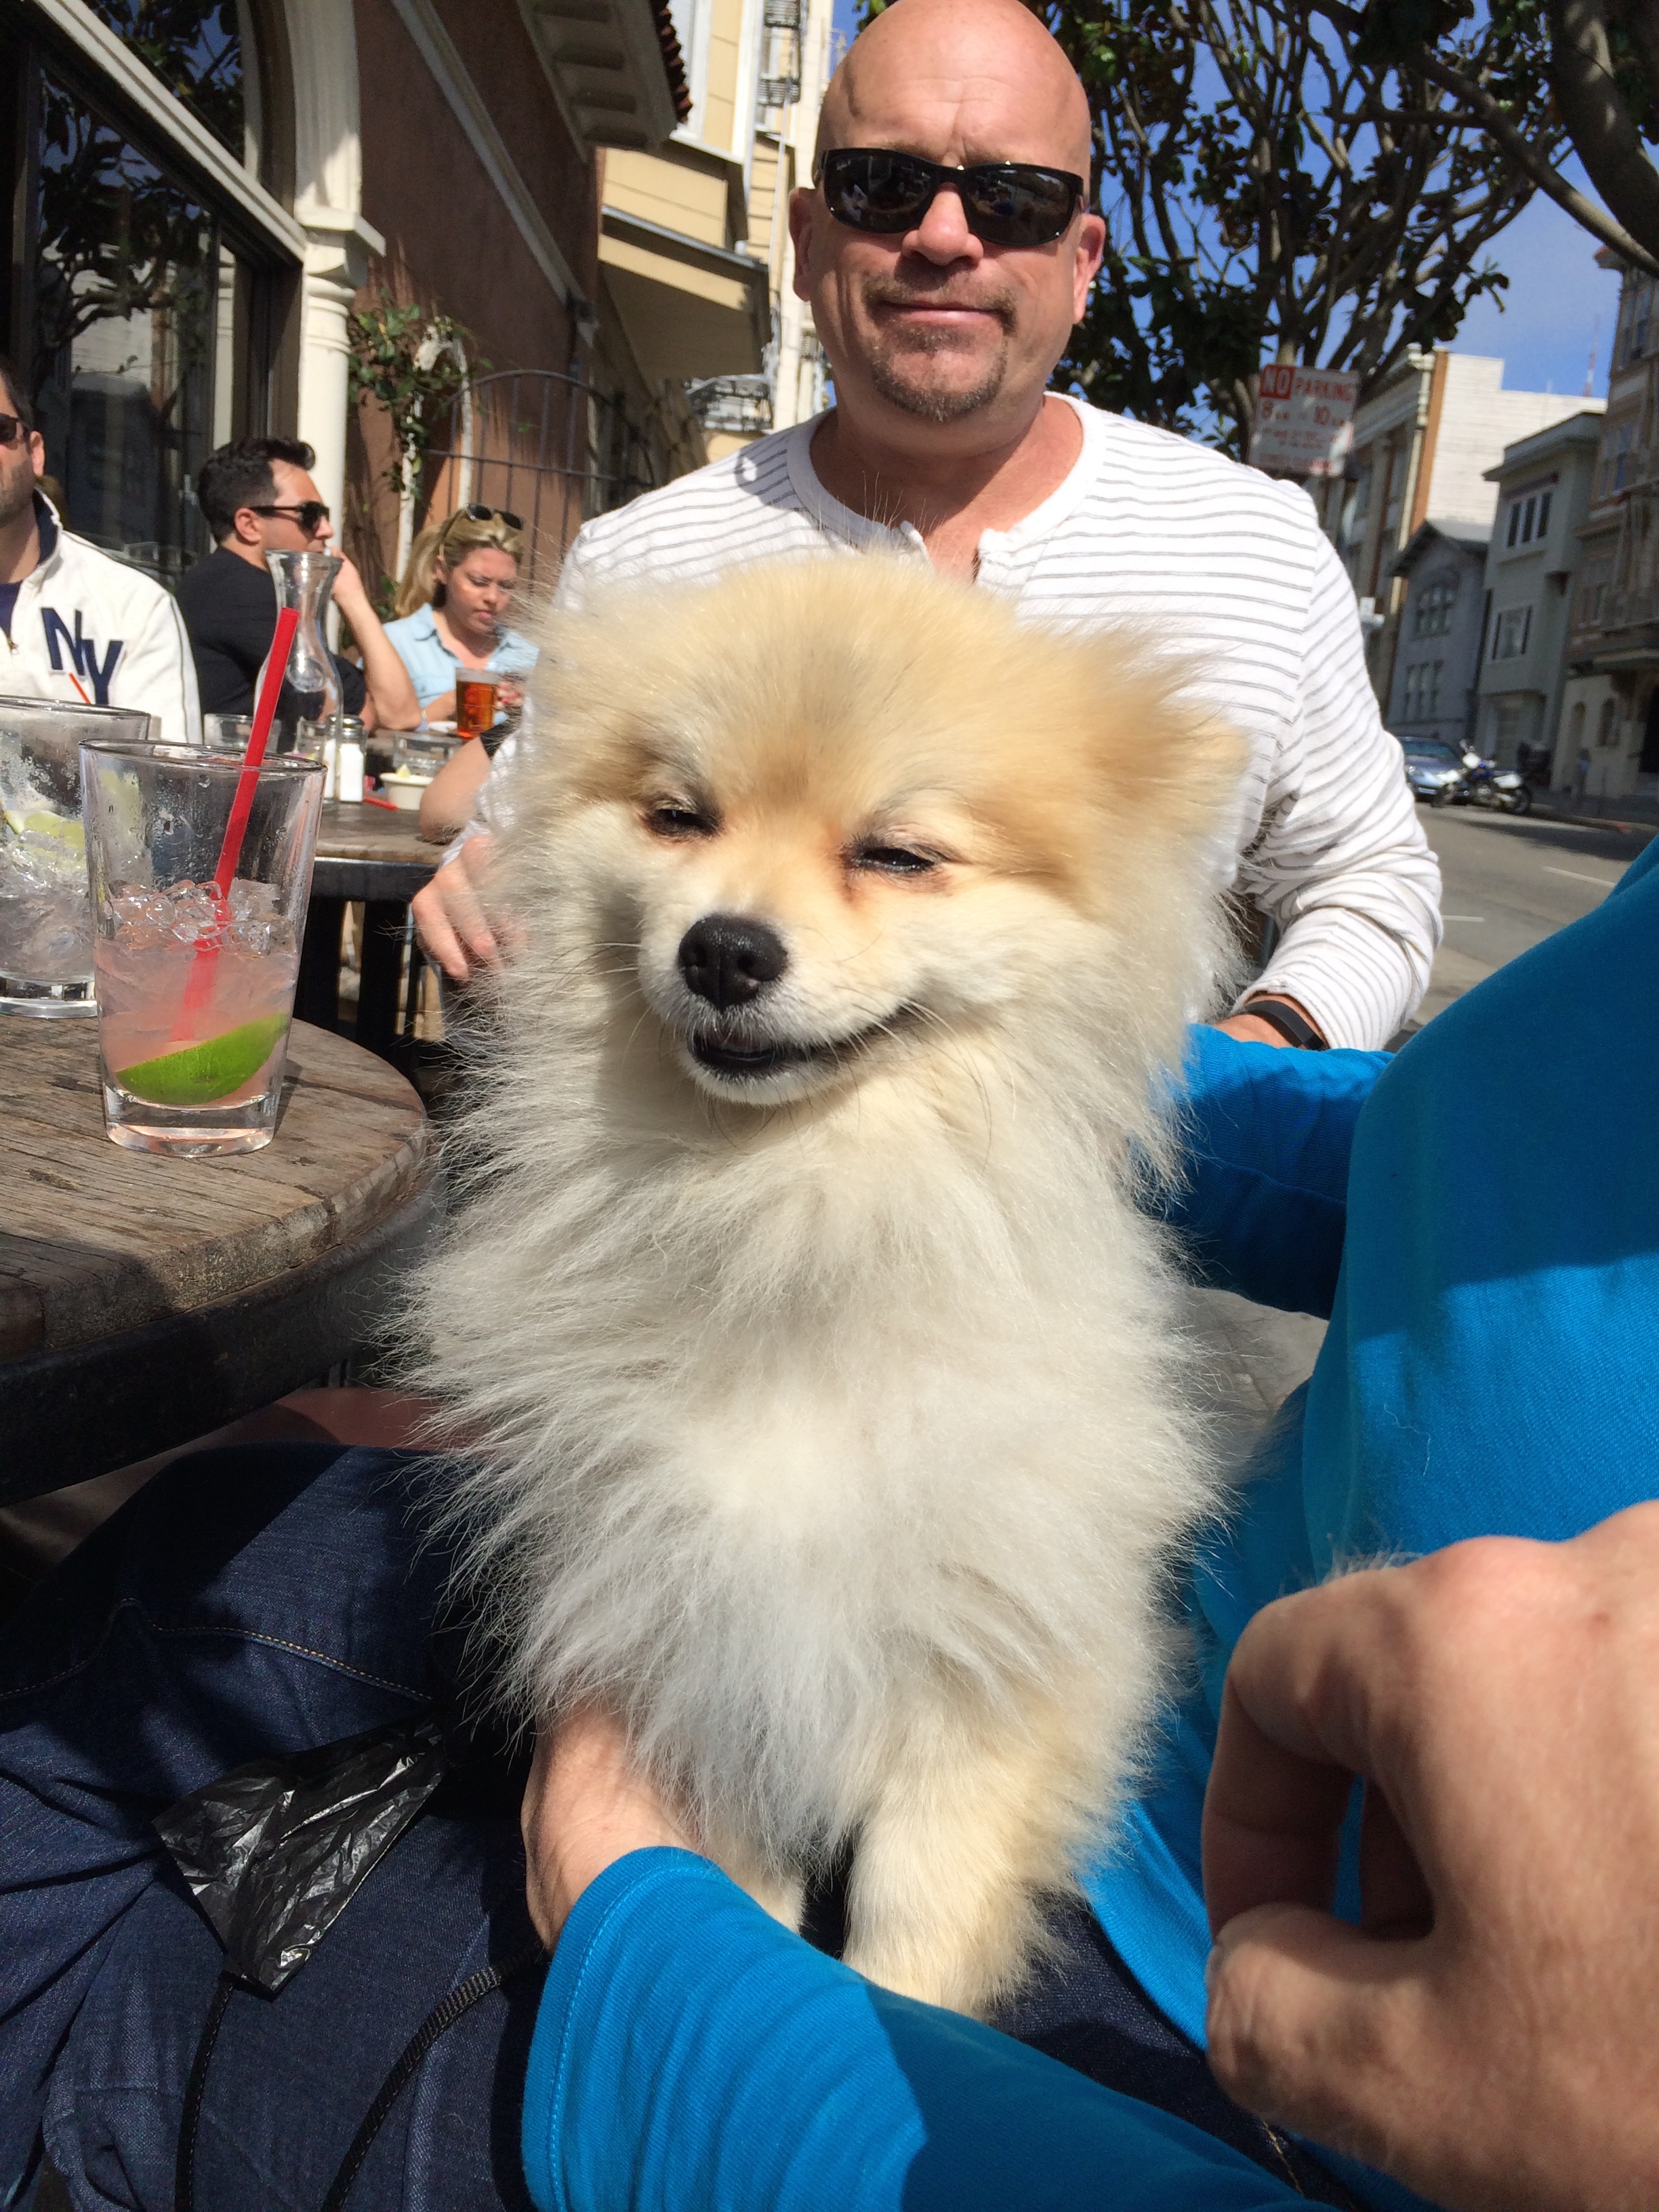 Smiling Pomeranian With Bald Man Behind Her